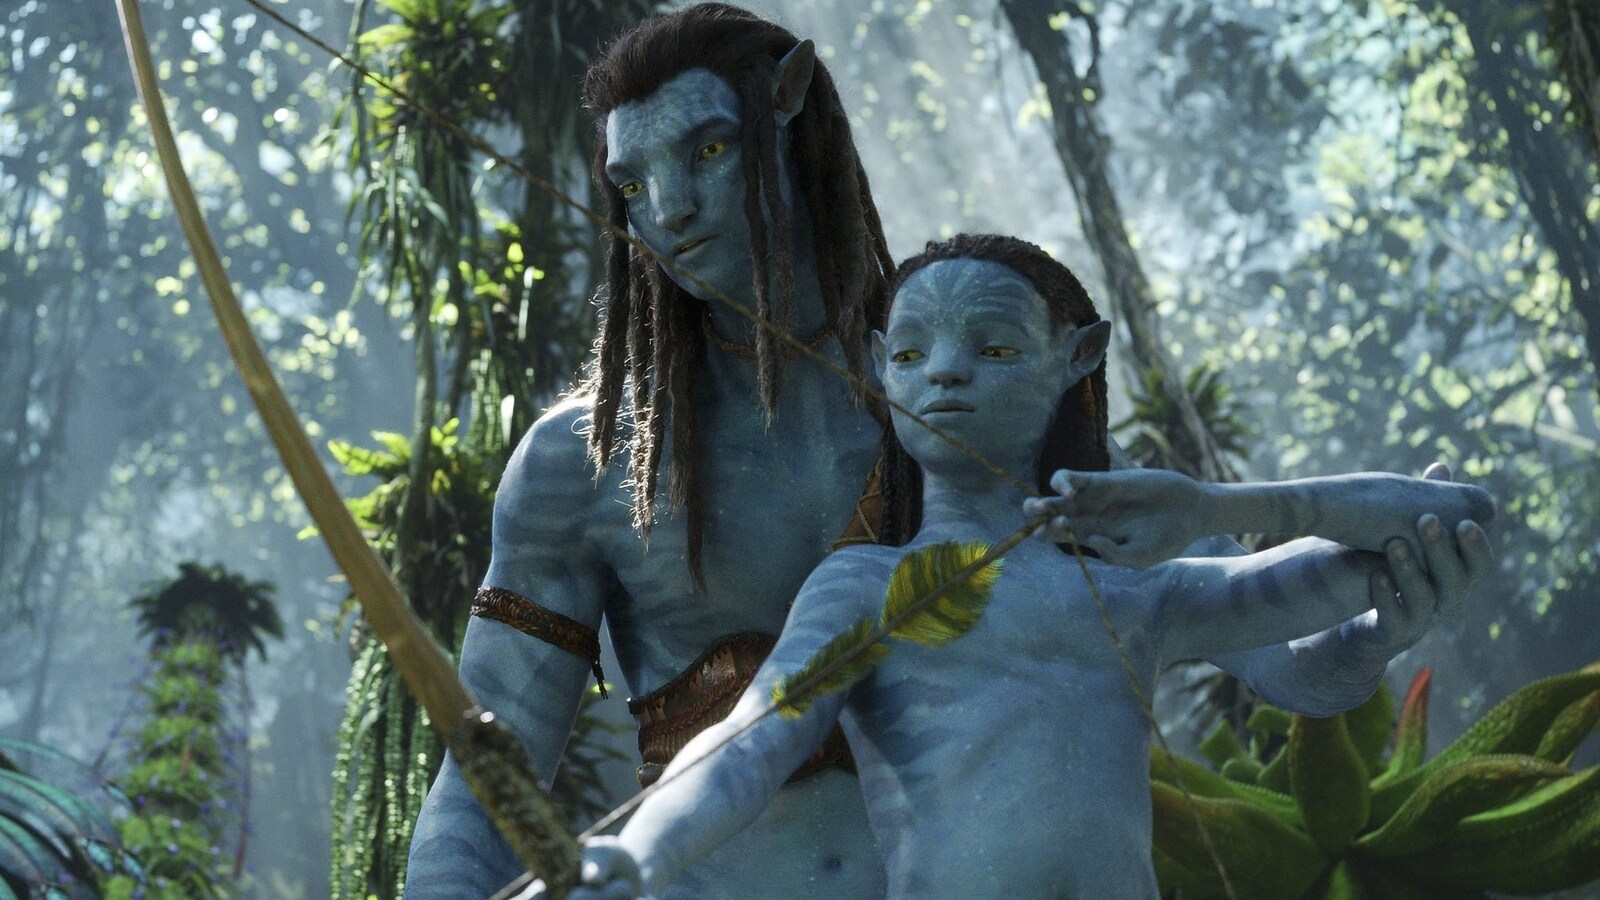 Avatar The Way of Water box office day 2 collection: Film mints ₹80 cr in just 2 days, isn’t as impressive overseas